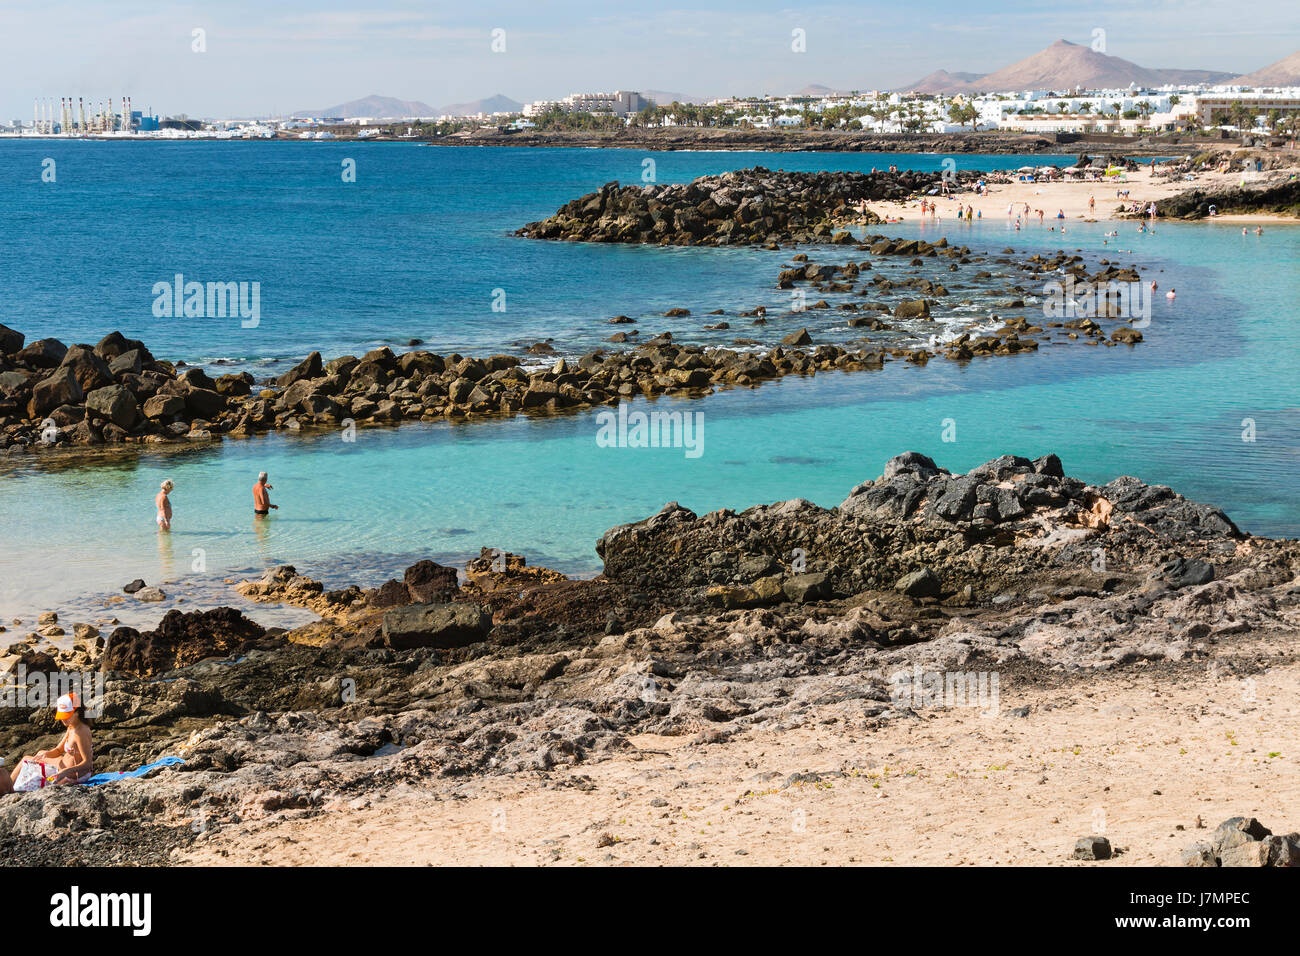 LANZAROTE - JANUARY 14: People at a lagoon at Costa Teguise Beach in Lanzarote, Spain with the village in the background on January 14, 2016. Stock Photo